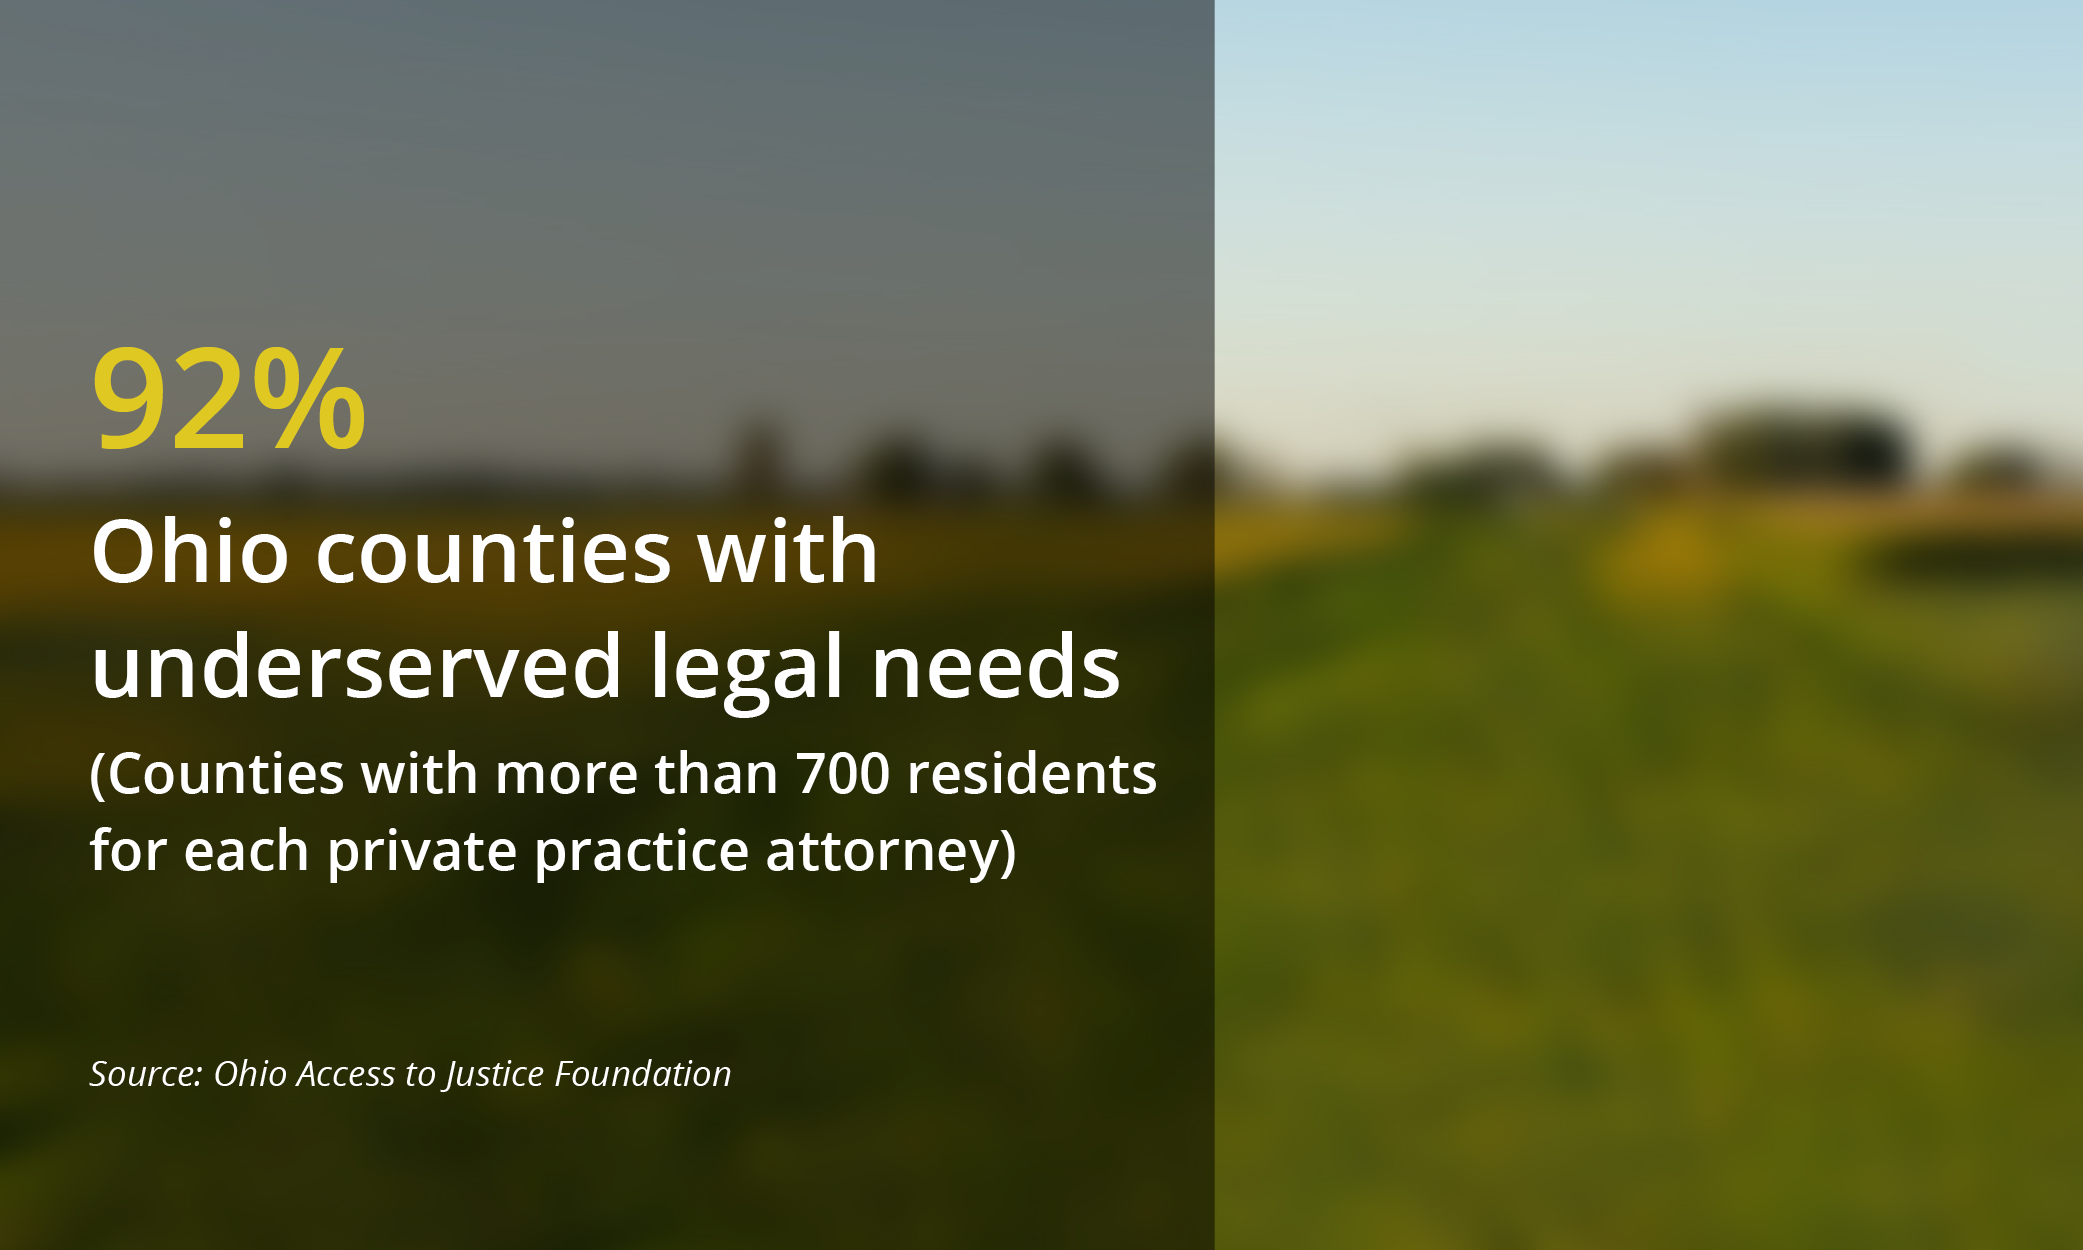 Infographic: 92% Ohio counties with underserved legal needs (Counties with more than 700 residents for each private practice attorney) - Source: Ohio Access to Justice Foundation.